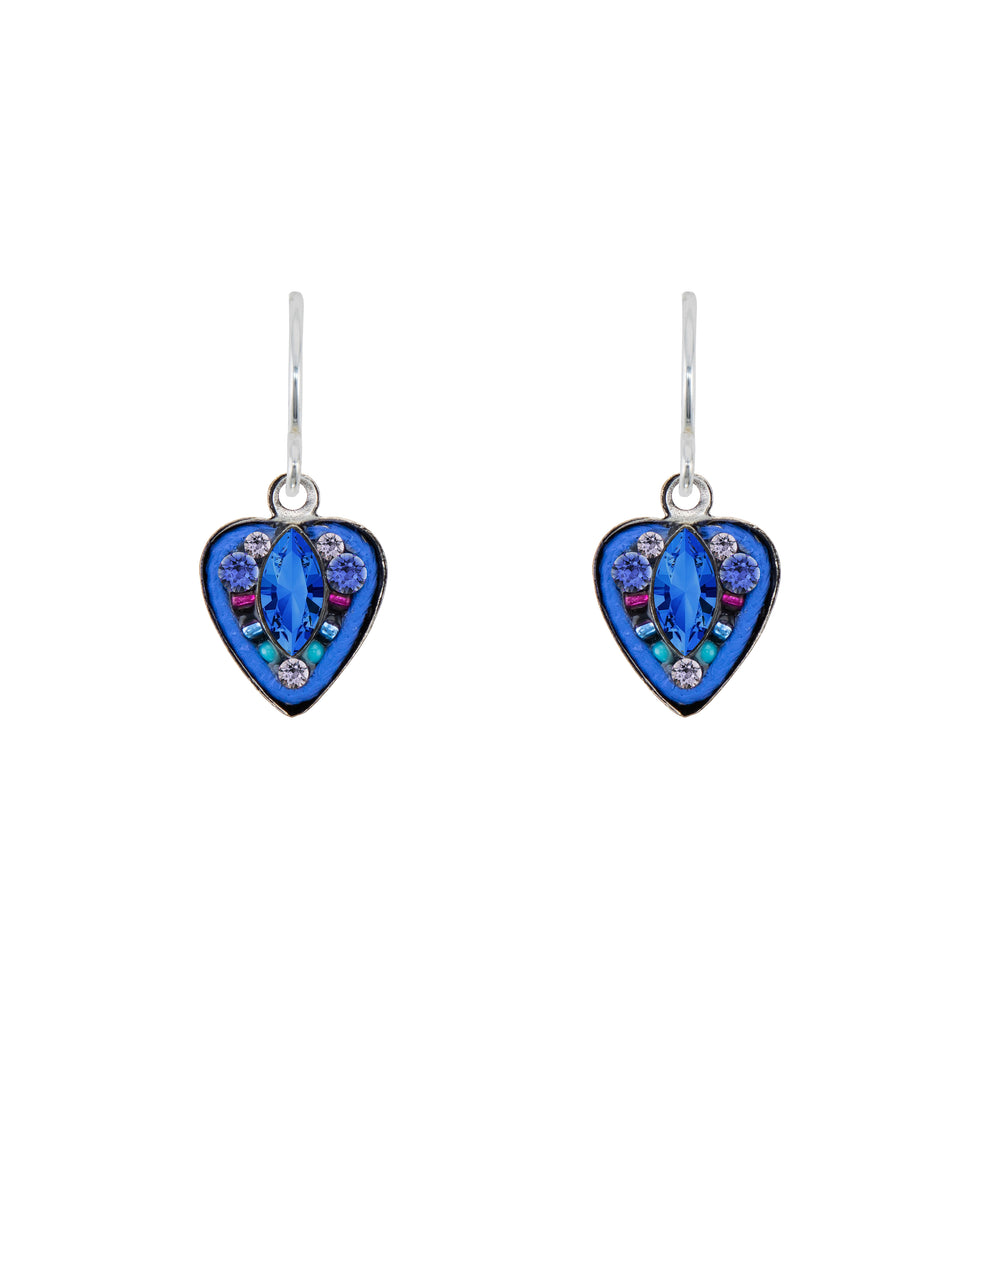 Firefly Mosaics: Heart and Marquis Stone Earrings in Sapphire